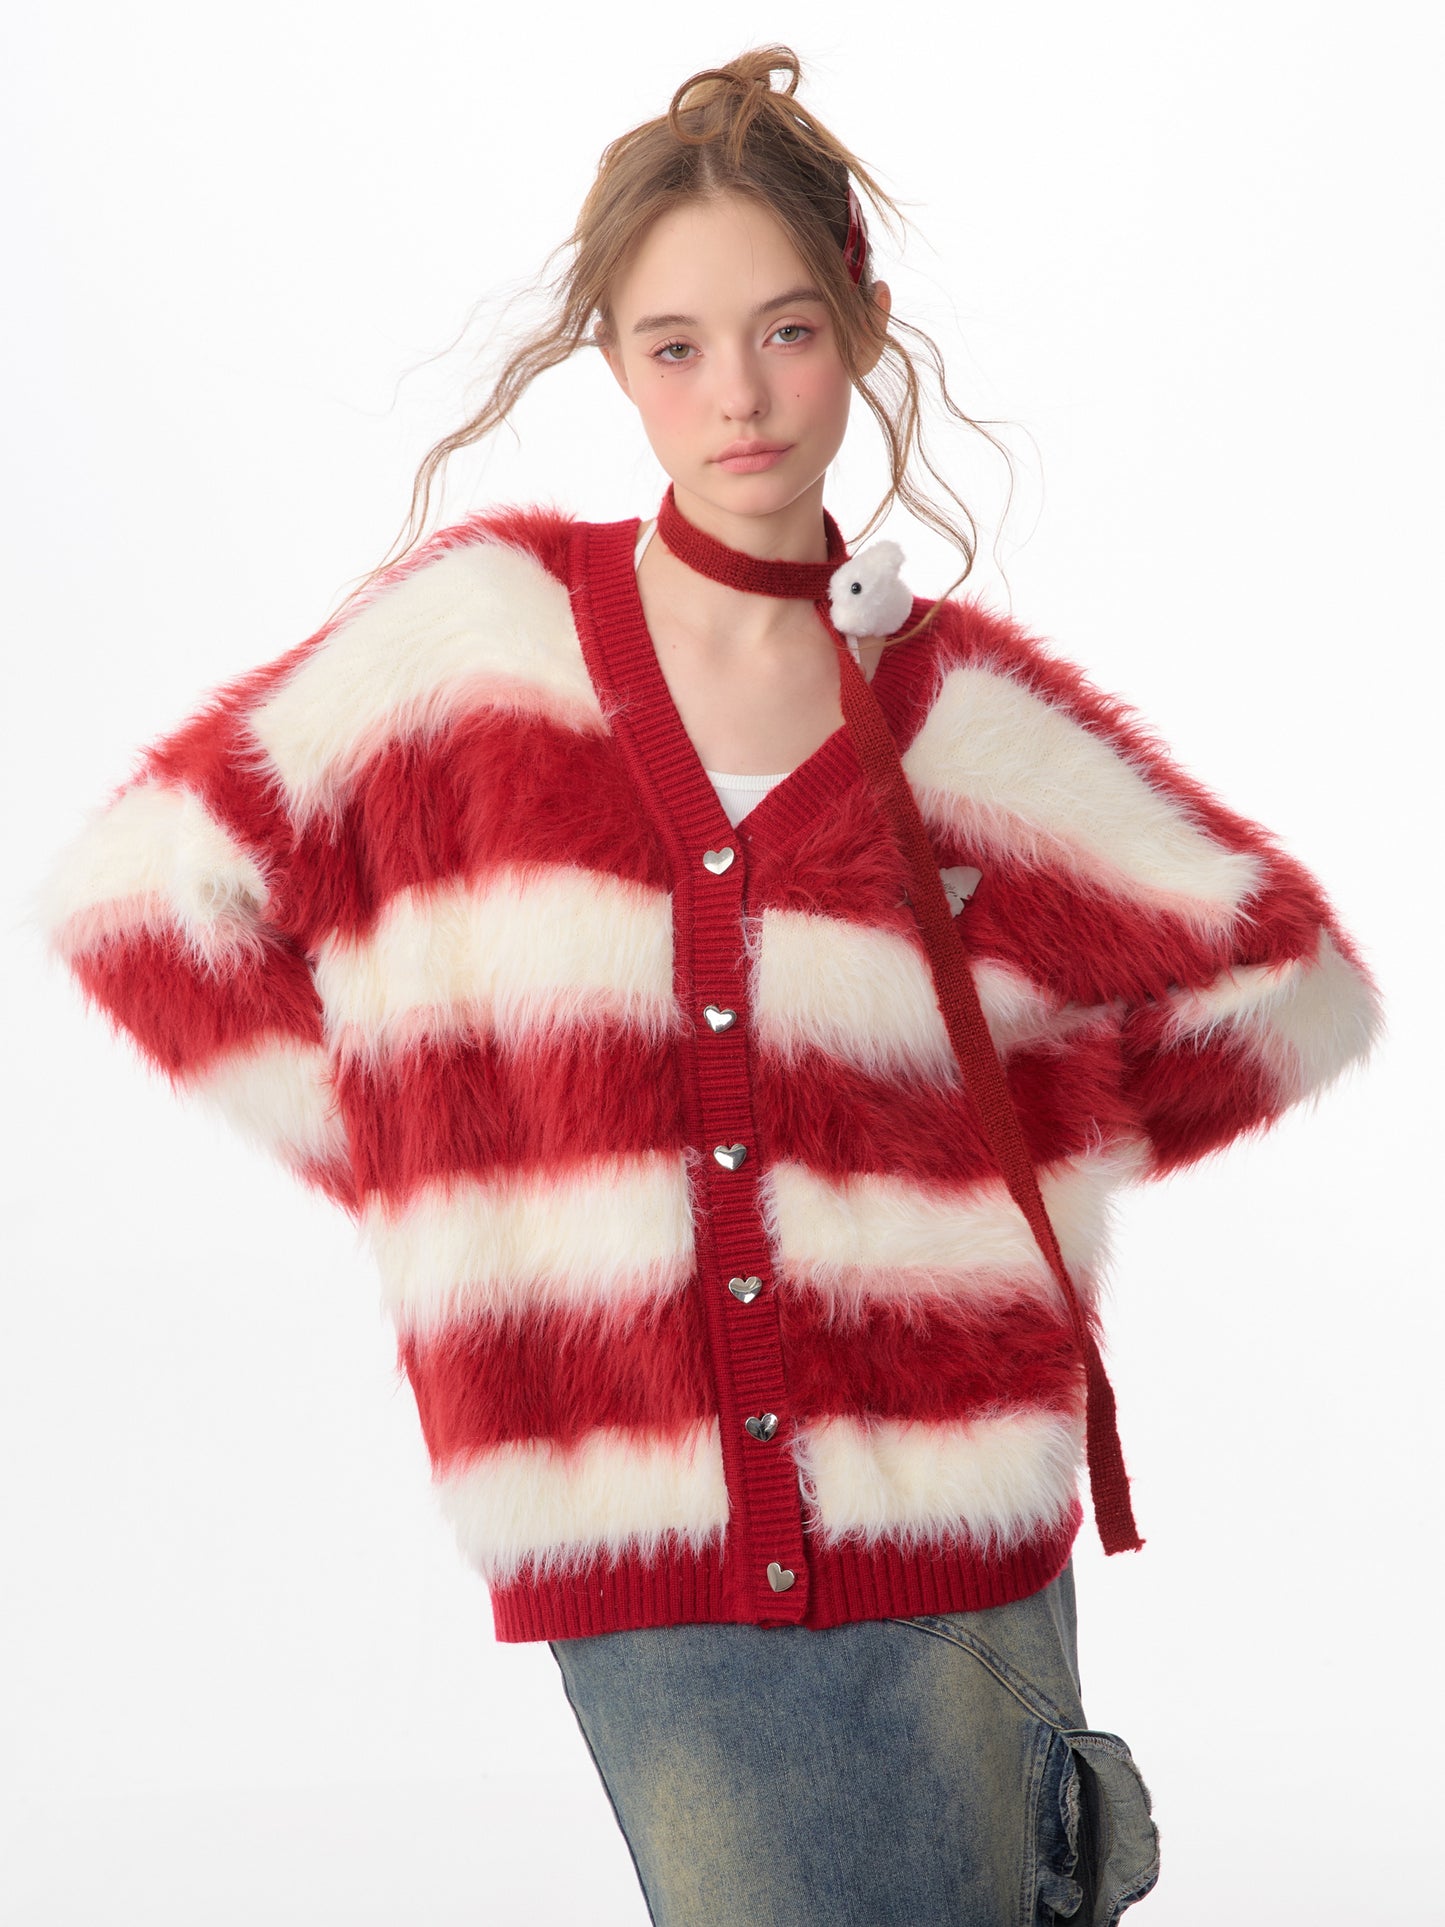 Christmas striped knitted sweater cardigan Jacket